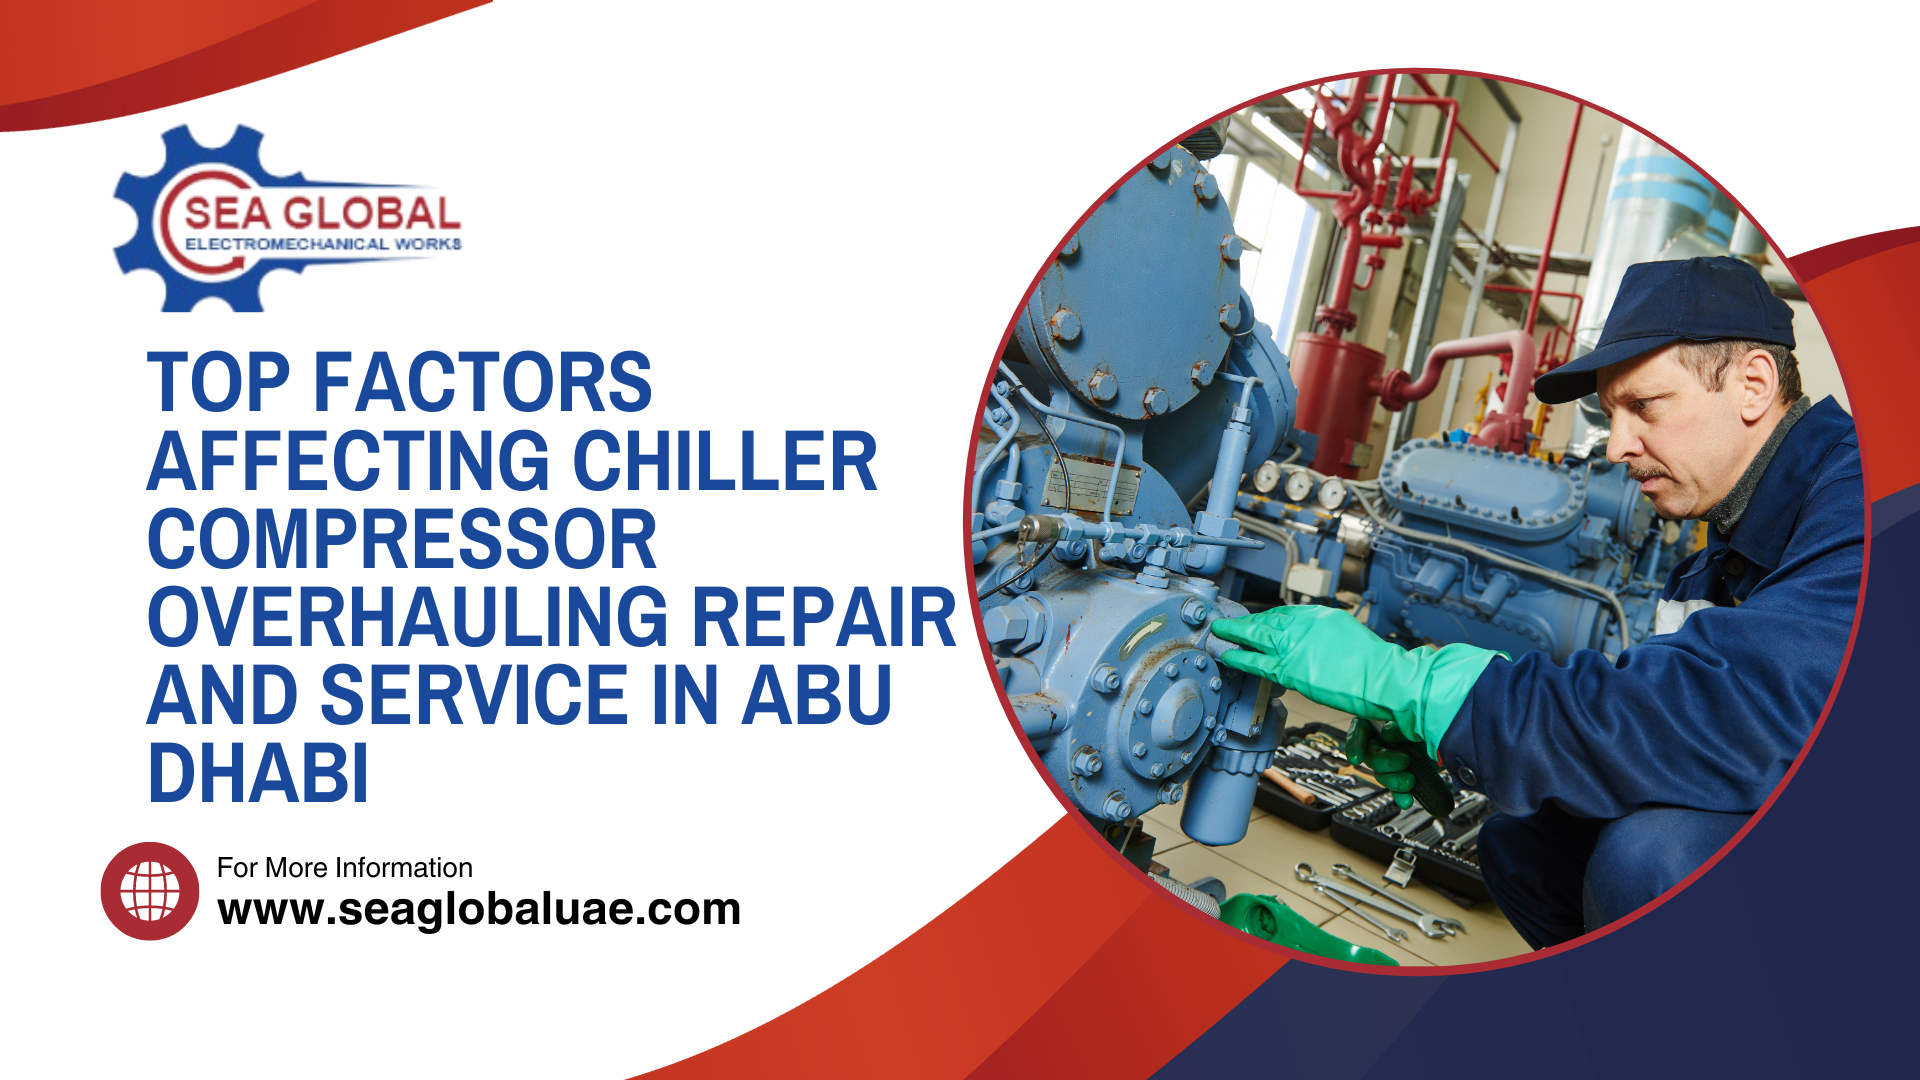 Top Factors Affecting Chiller Compressor Overhauling Repair and Service in Abu Dhabi